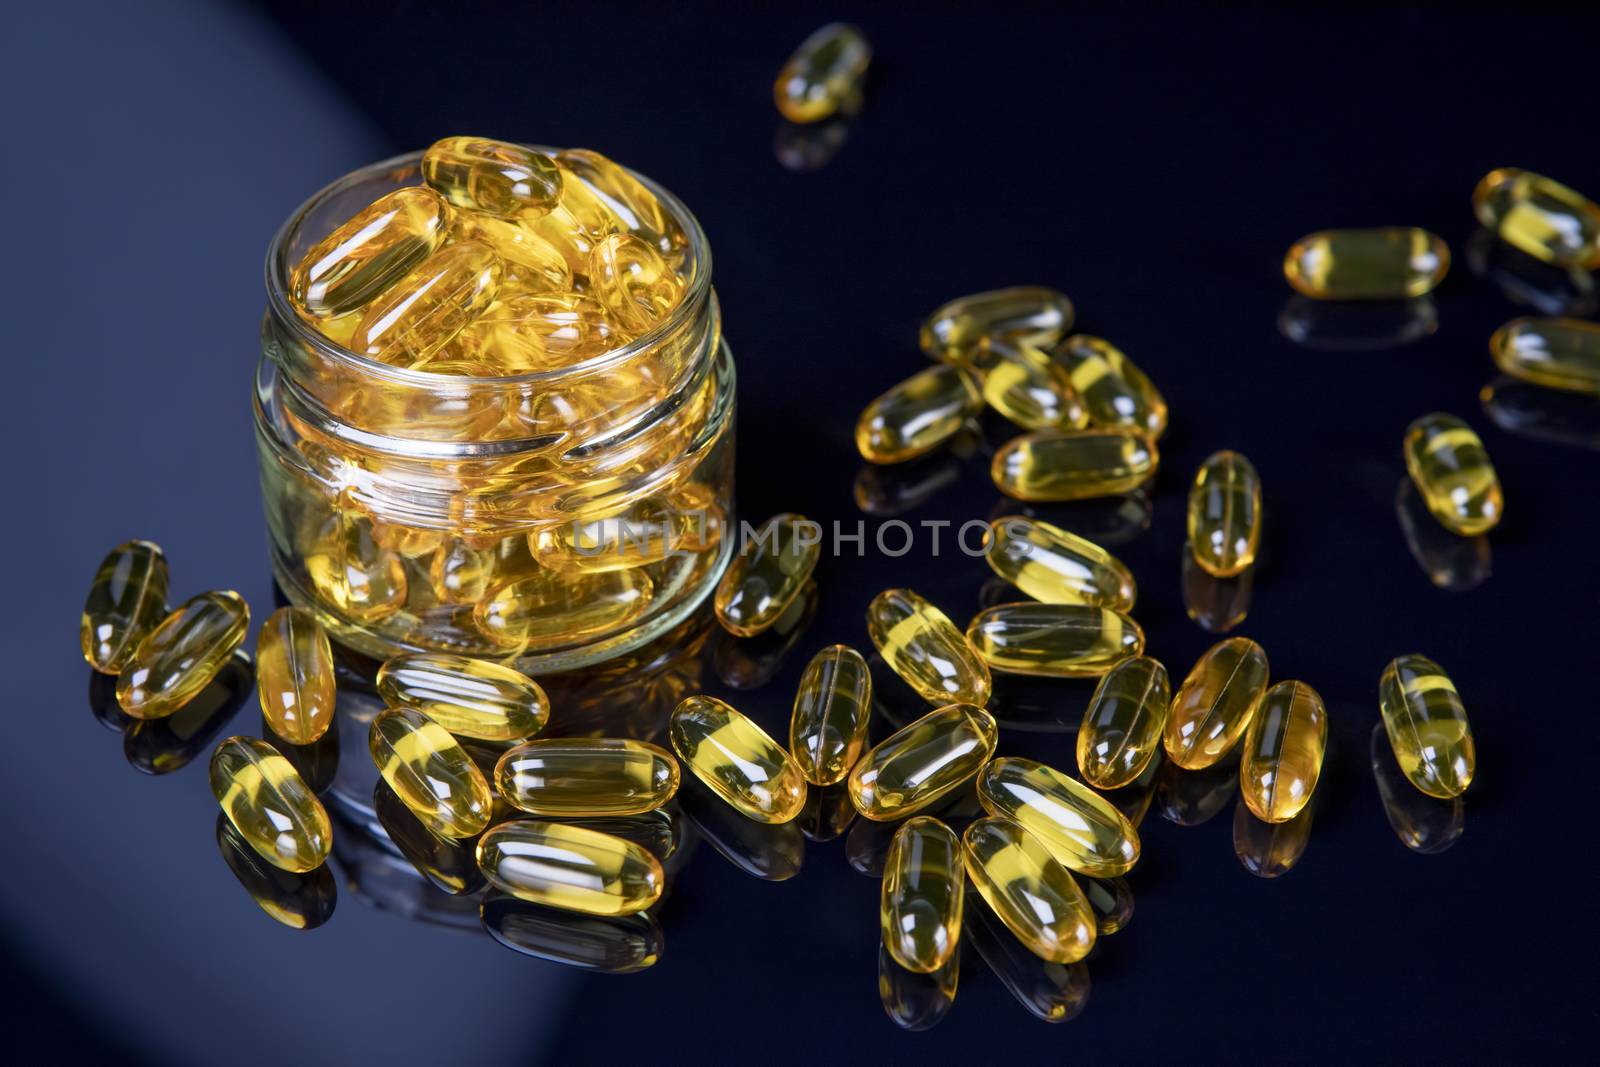 Omega fish oil softgels dietary supplement in jar. Healthy life and heart health concept. Focus on pills in jar